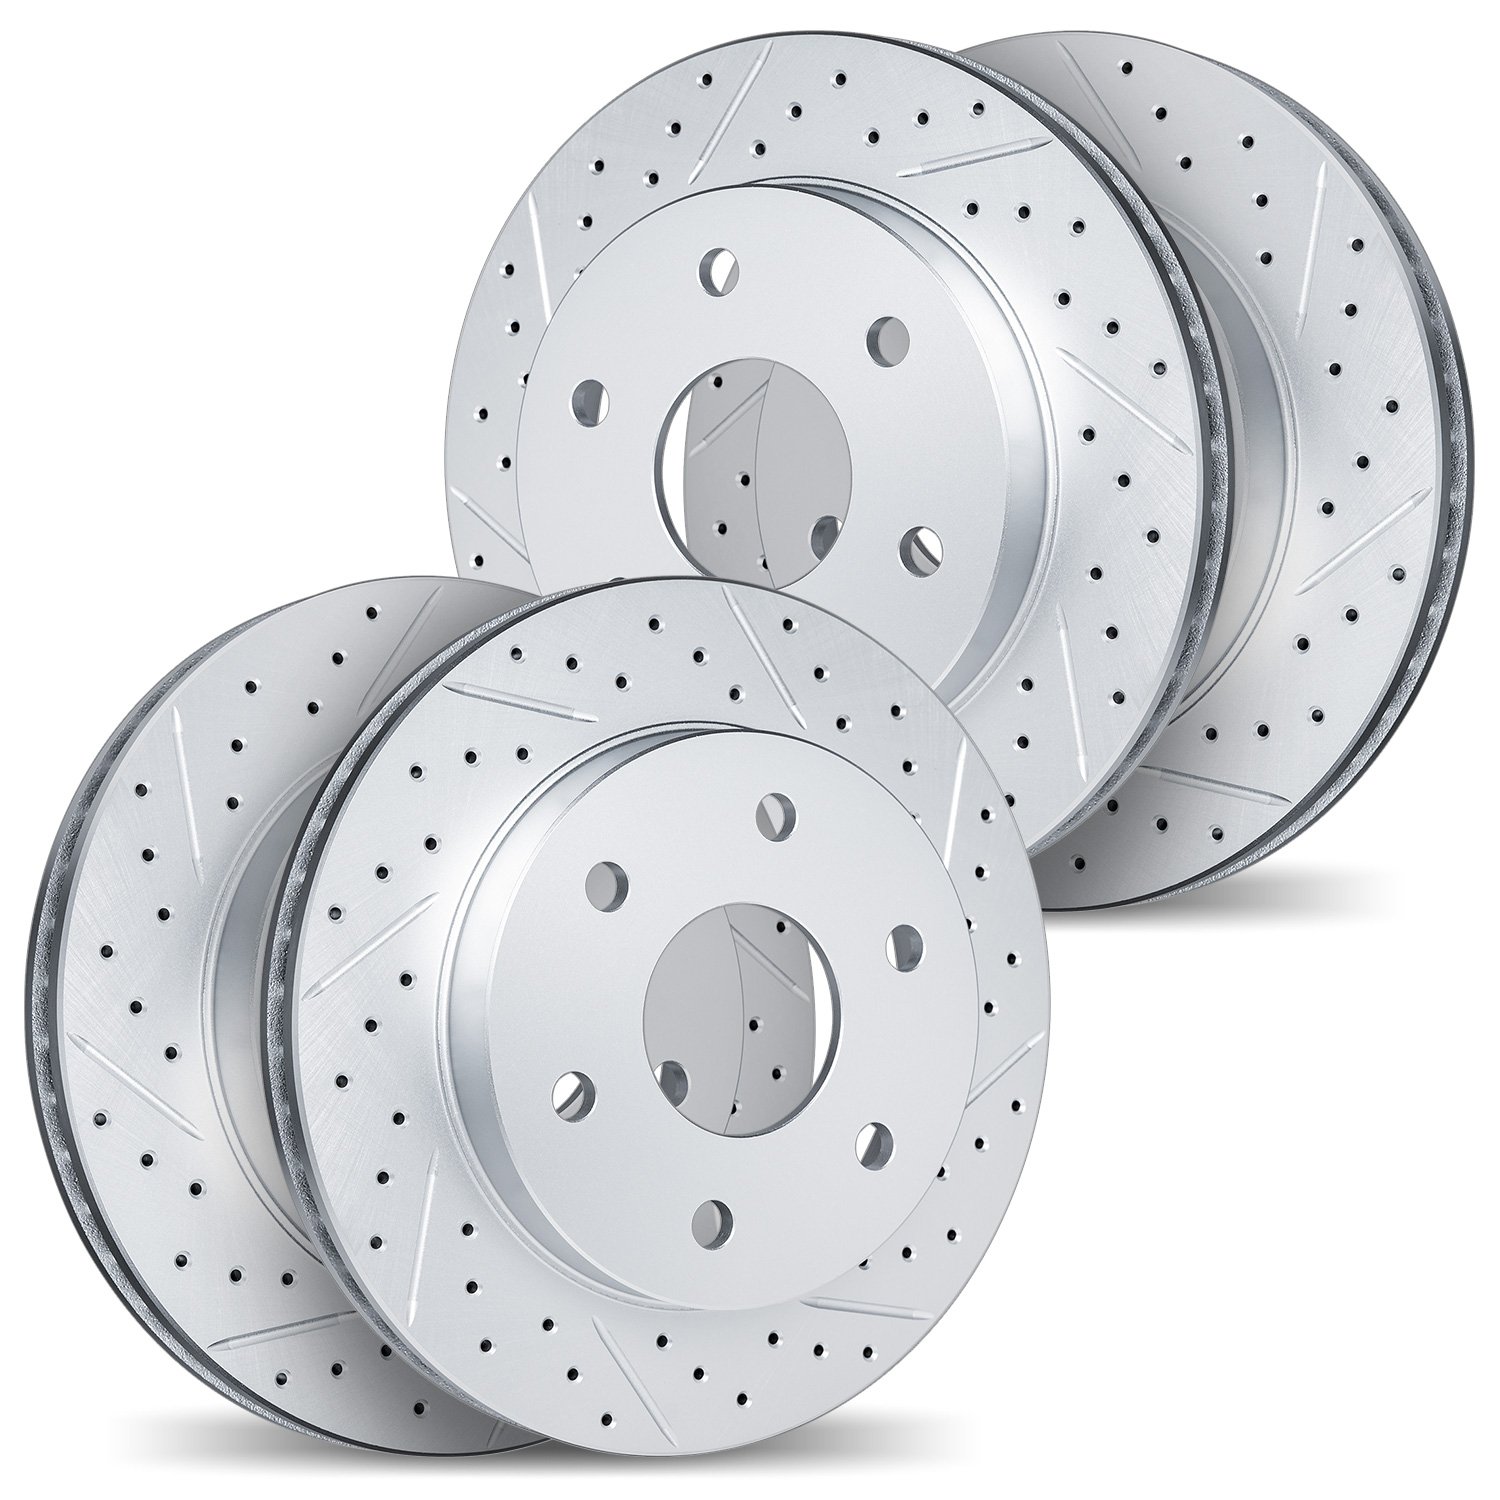 2004-67069 Geoperformance Drilled/Slotted Brake Rotors, Fits Select Infiniti/Nissan, Position: Front and Rear